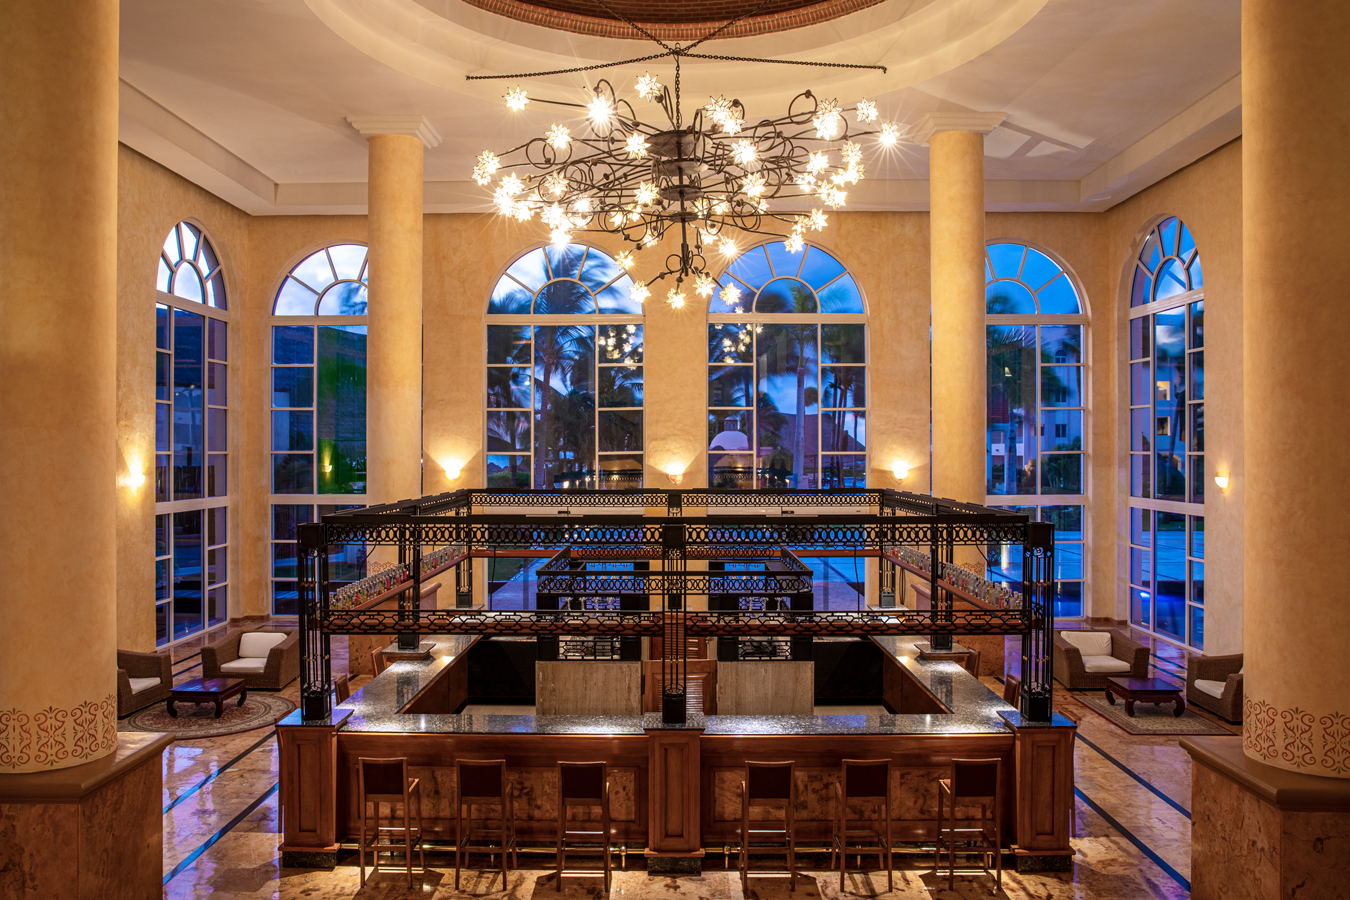 In the Martini Bar at Excellence Riviera Cancun you can enjoy your favorite martinis in the main lobby